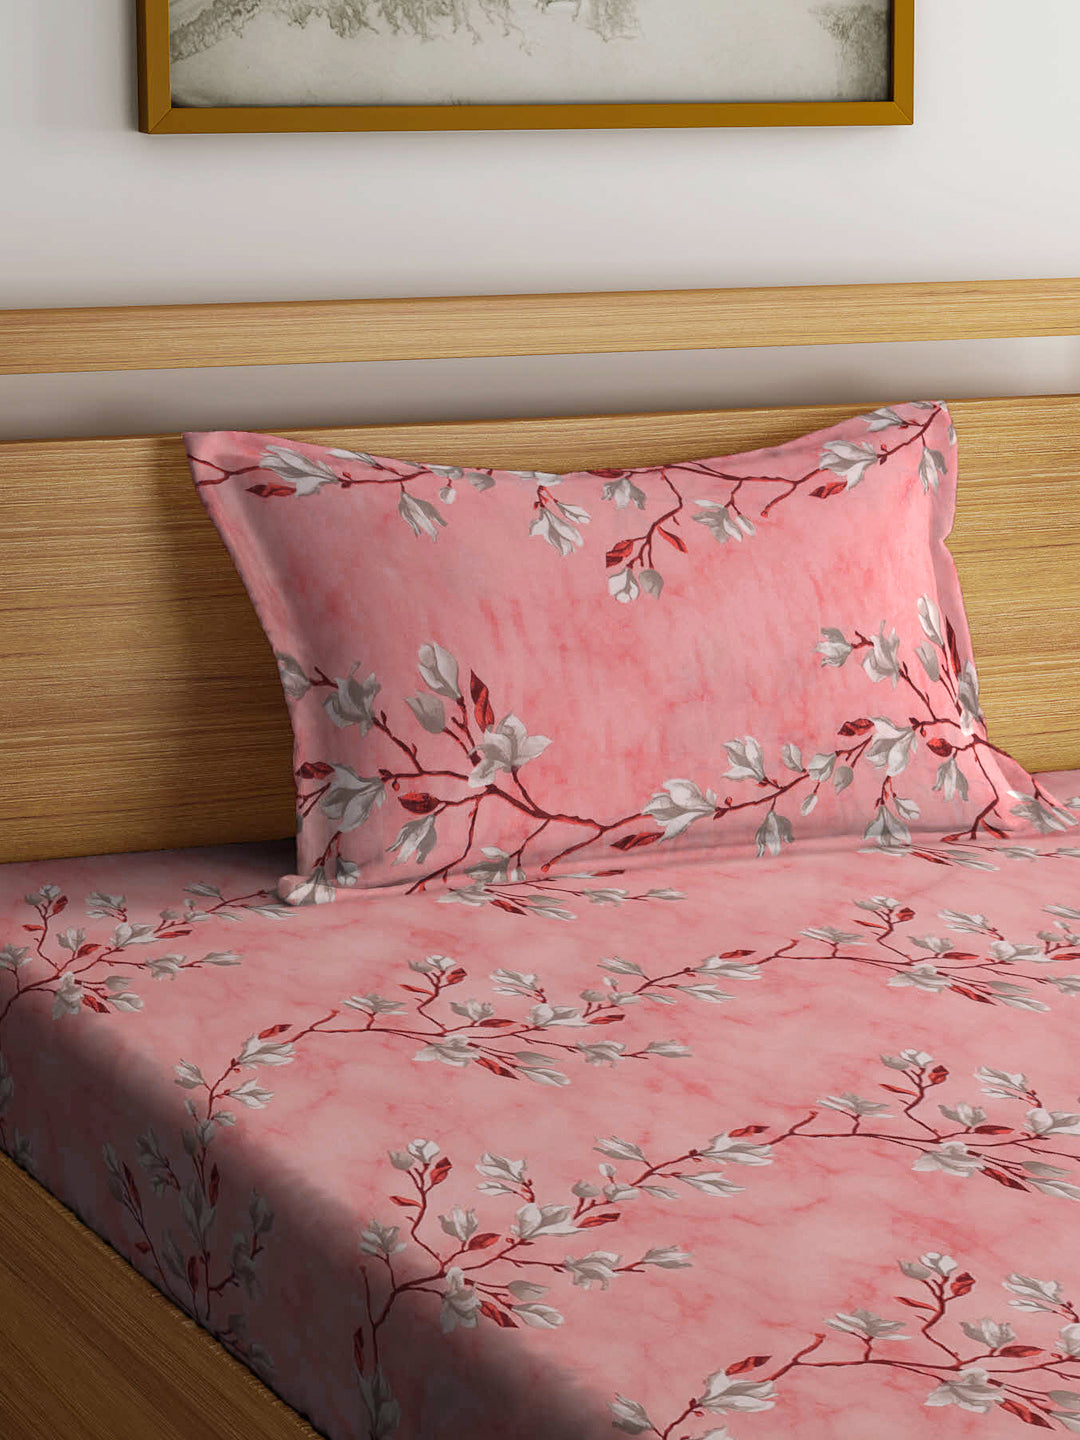 Klotthe Multicolor Floral 400 TC Pure Cotton Fitted Single Bedsheet Set in Book Fold Packing